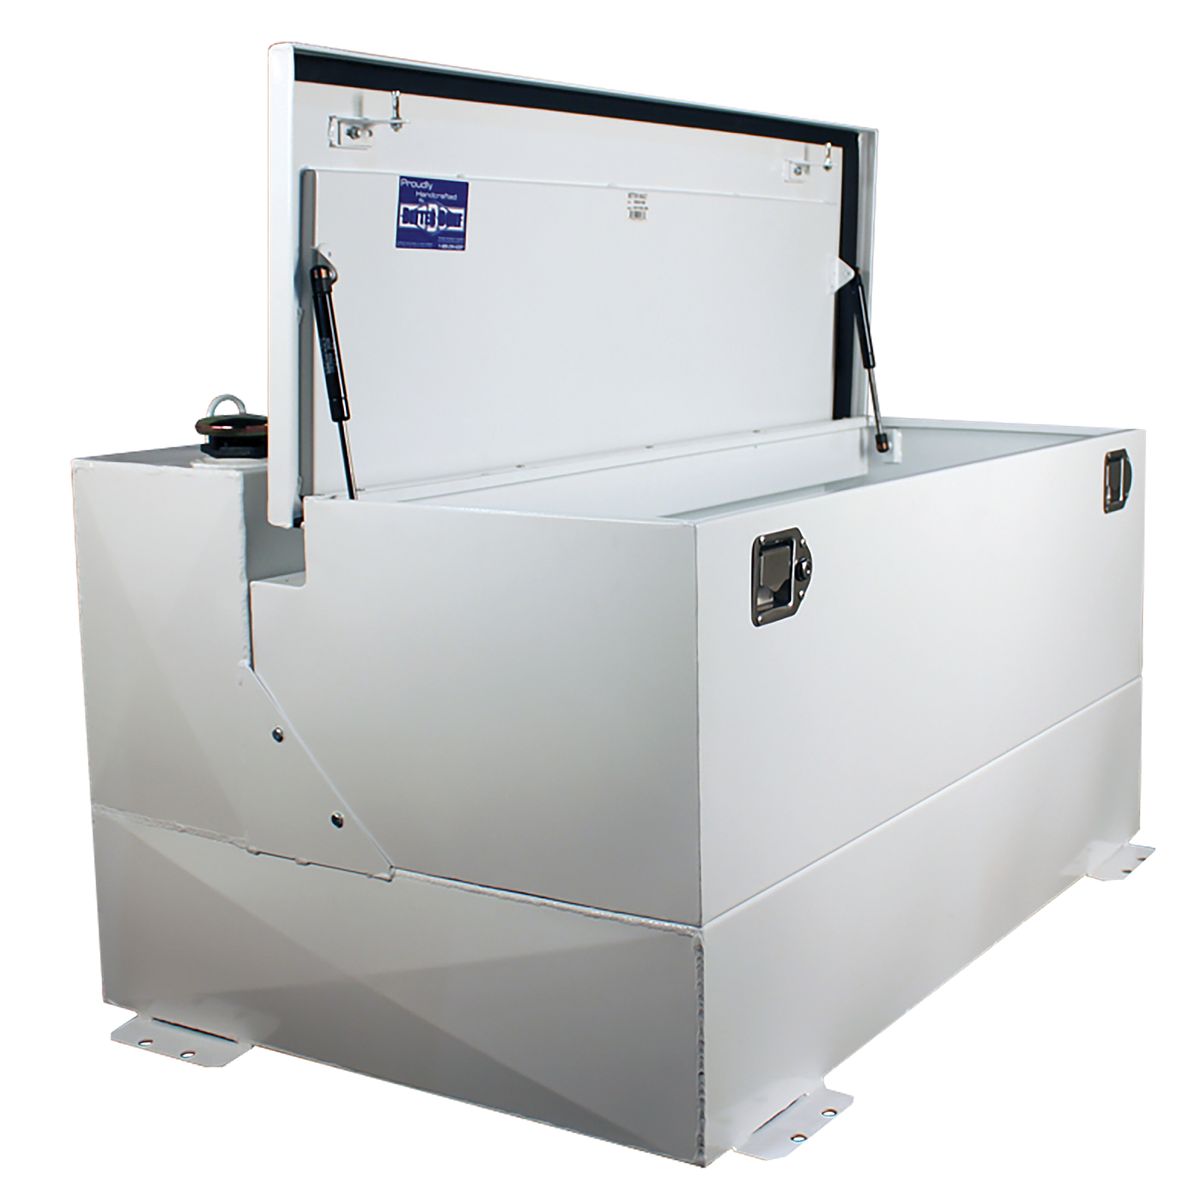 Better Built 36 gal. Steel Fuel Transfer Tank, White at Tractor